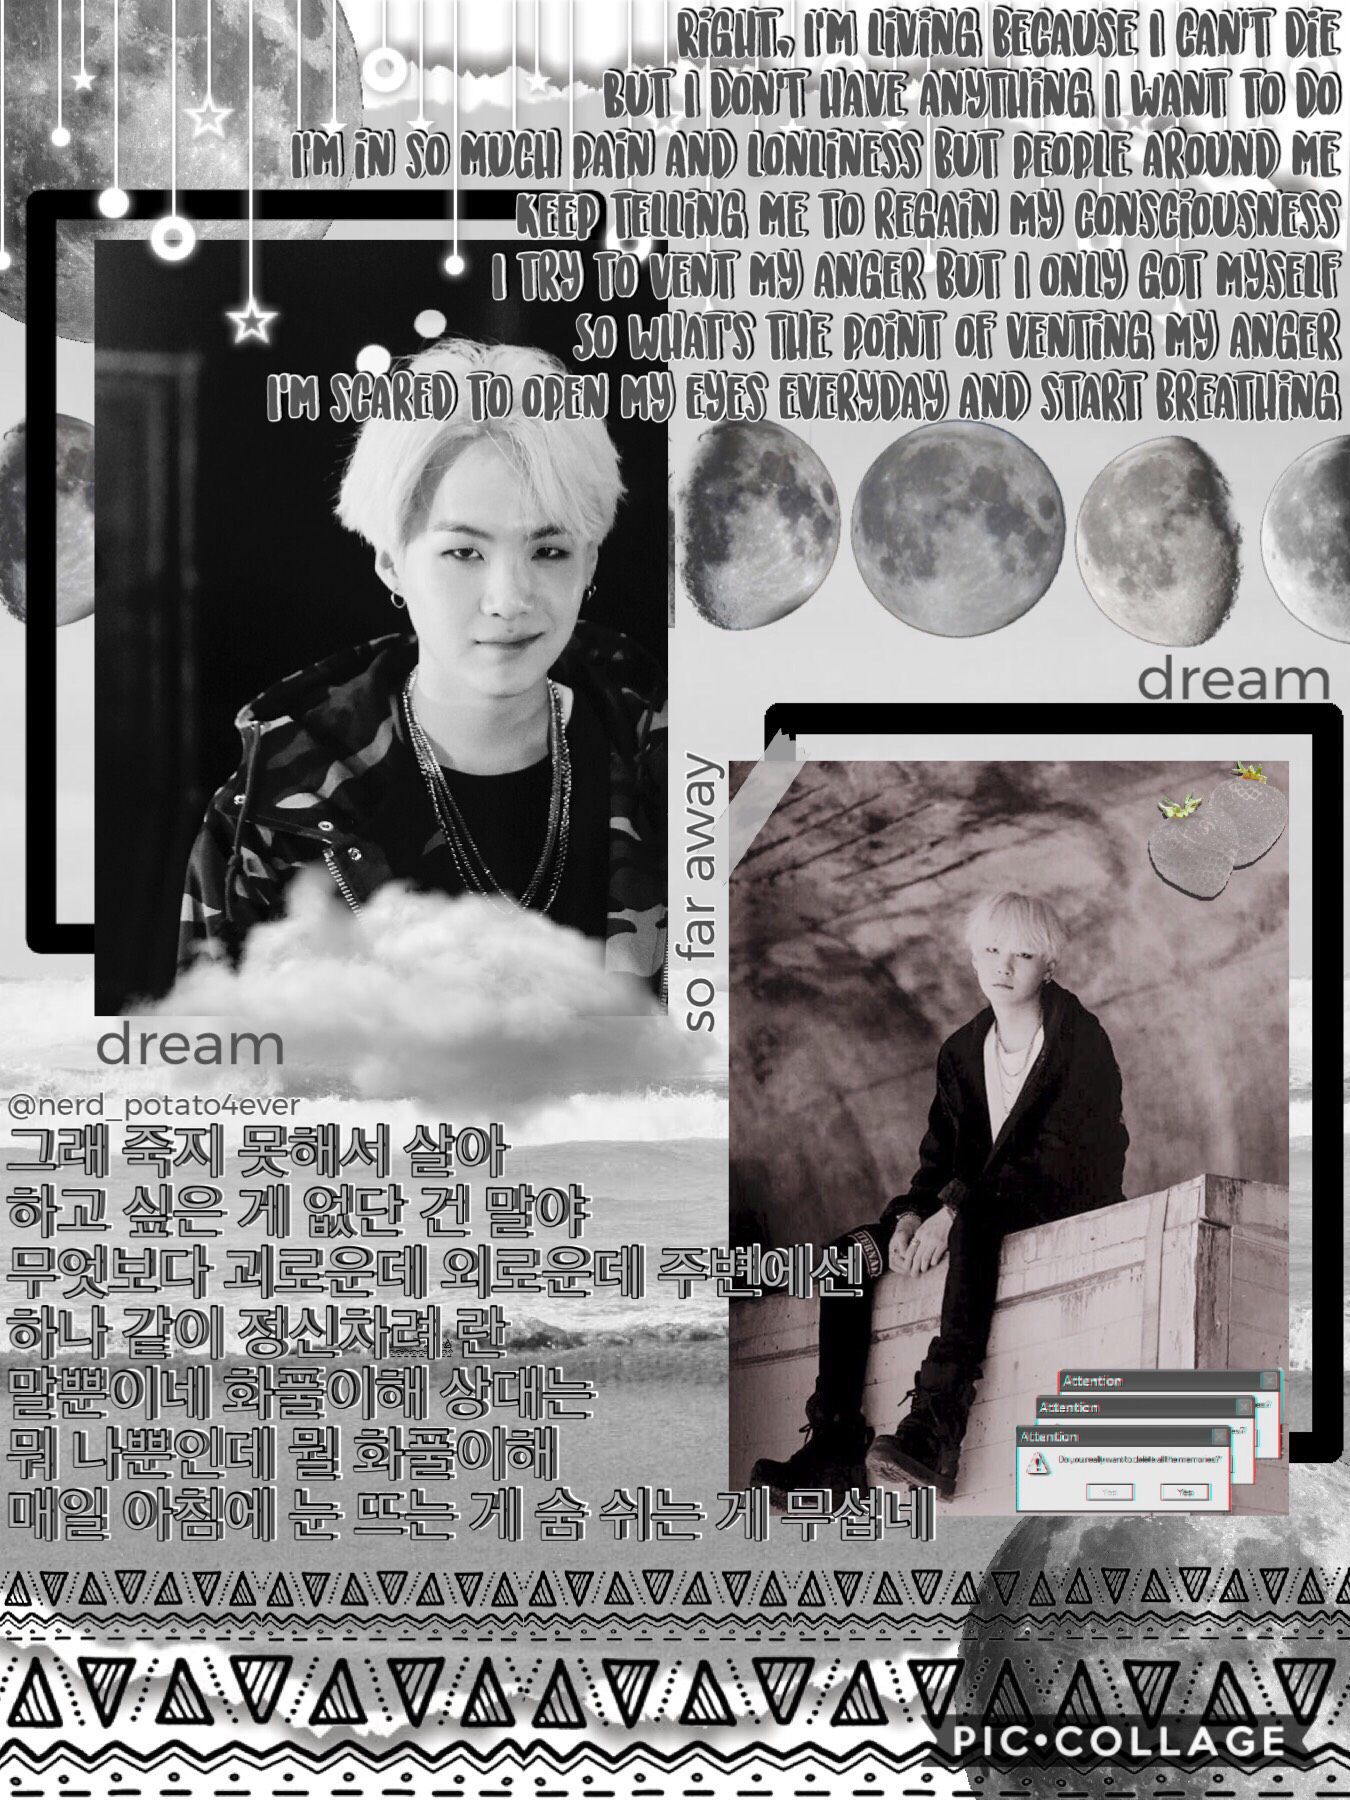 I just had to make an edit bc I love So far Away so much❤️ BUT THIS IS TRASH NOT AN EDIT 






I LUB YOU AGUST DDDDDD
lowkey proud but this is trasH
comment if you saw this lol